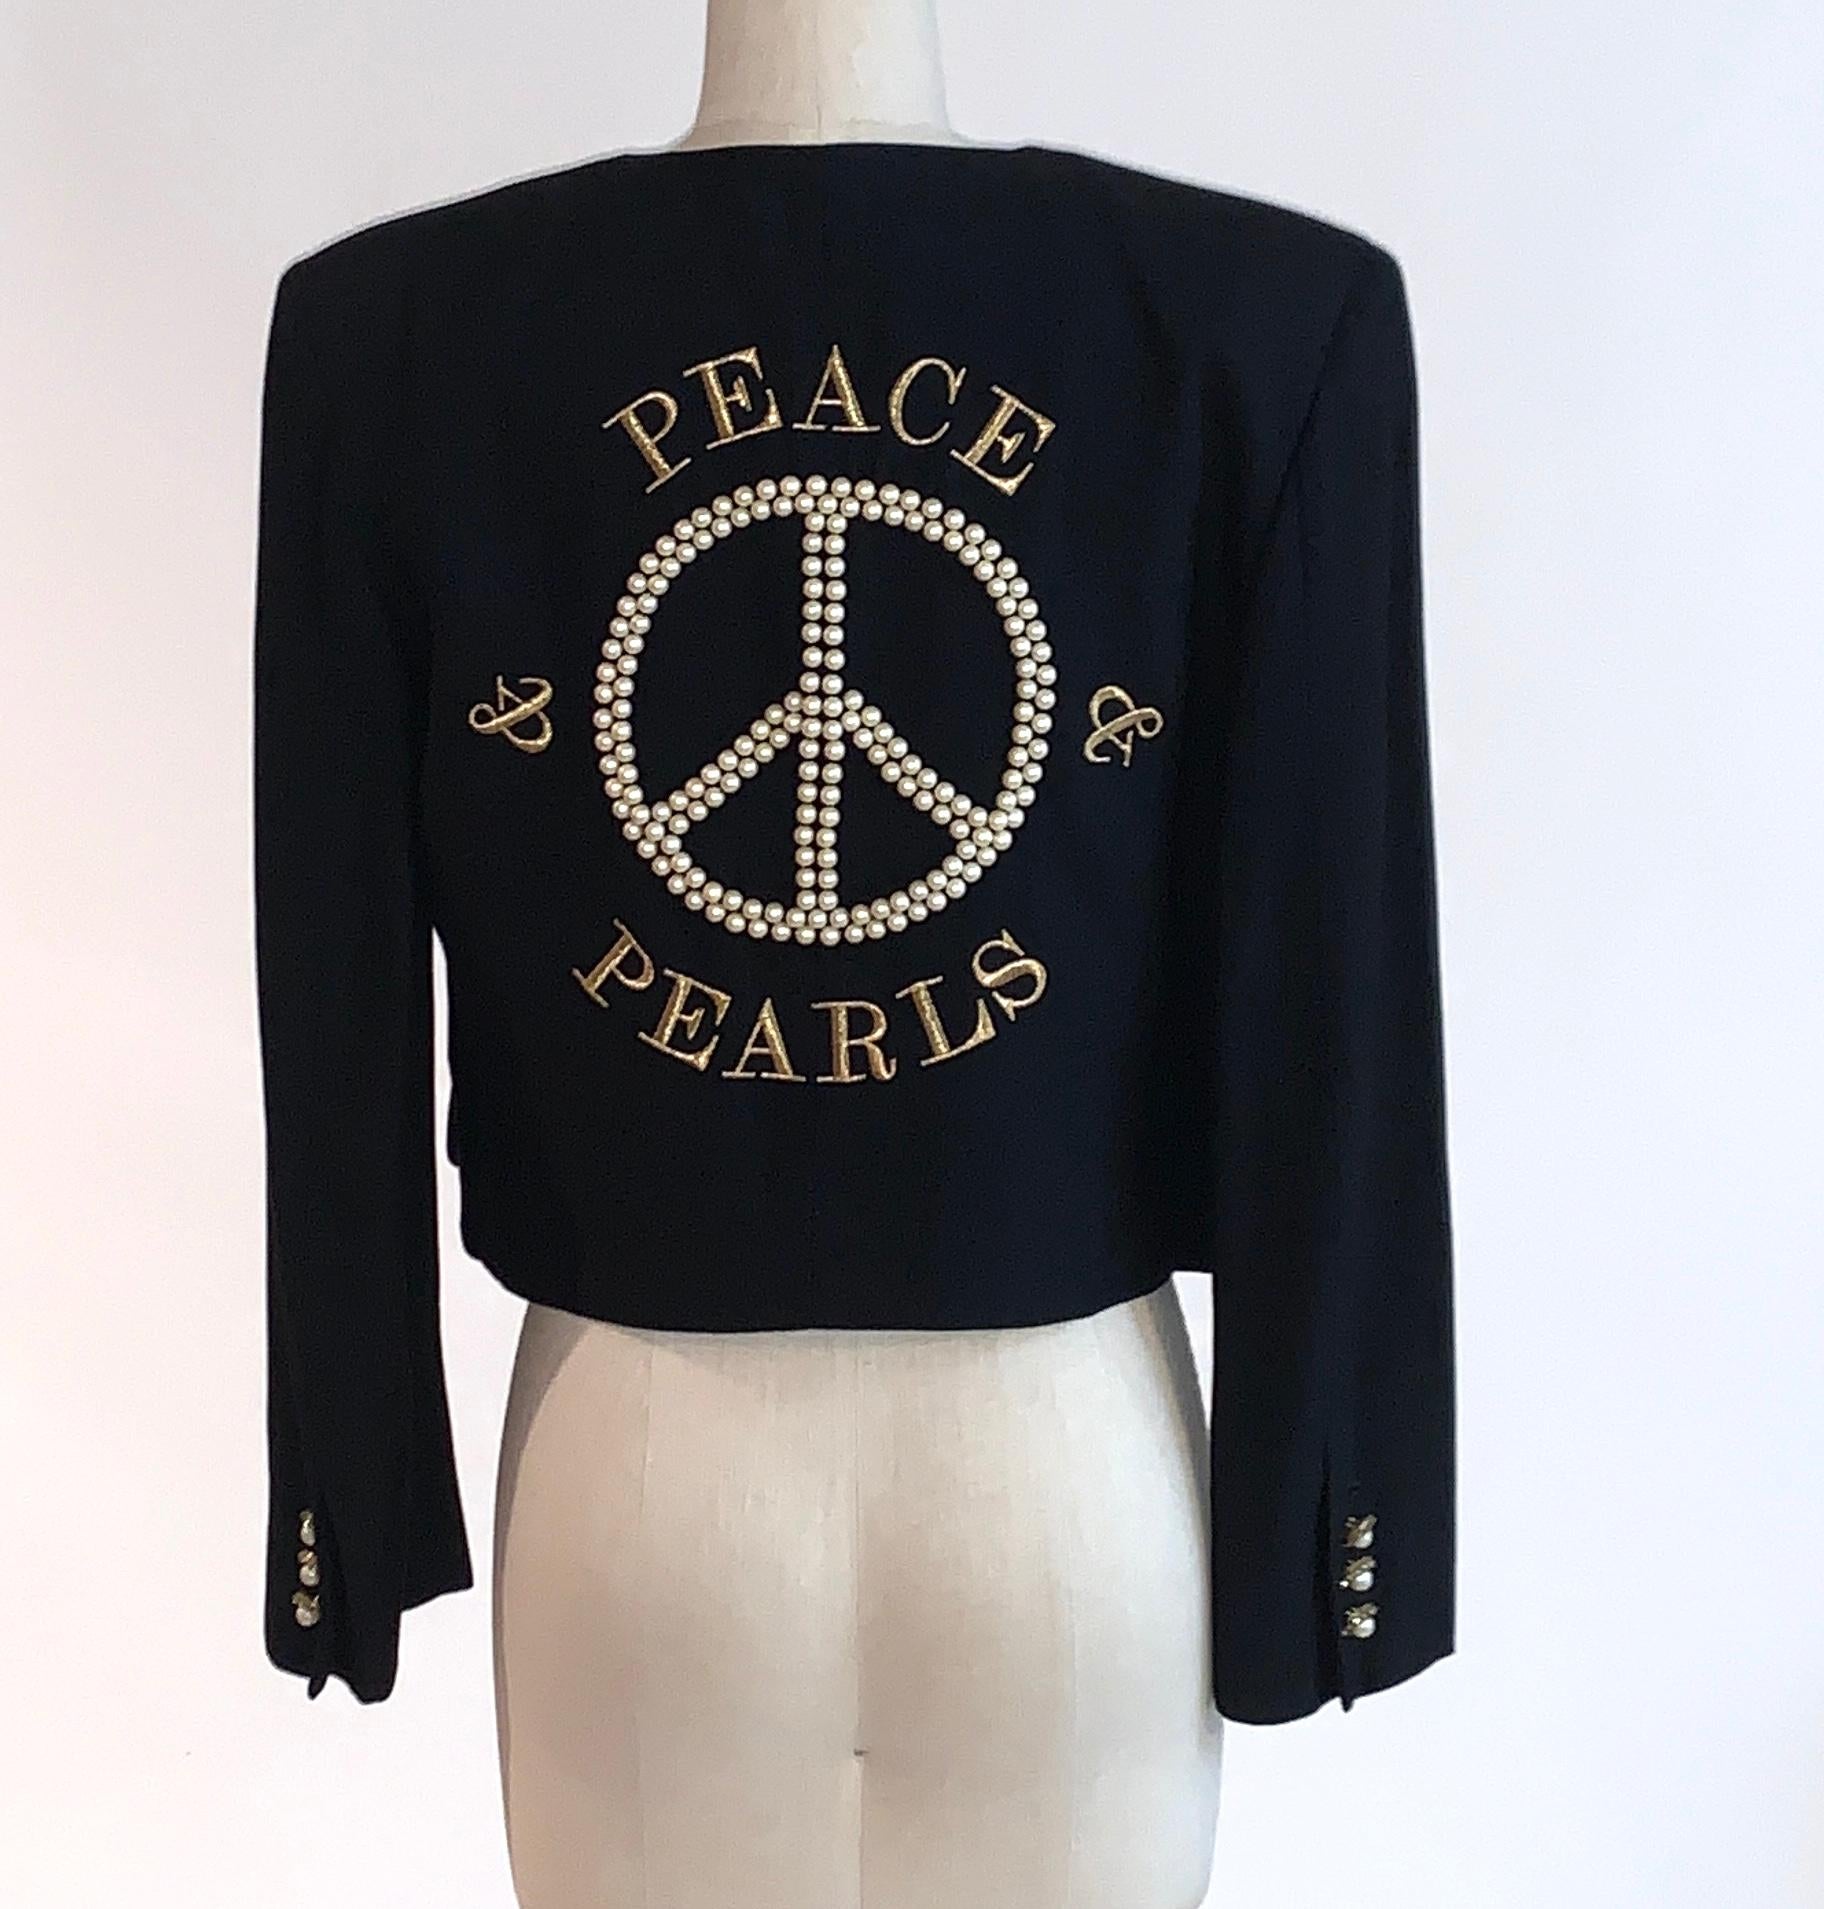 Moschino Couture peace and pearls short jacket featuring pearl peace sign embellishment at back and gold embroidery reading 